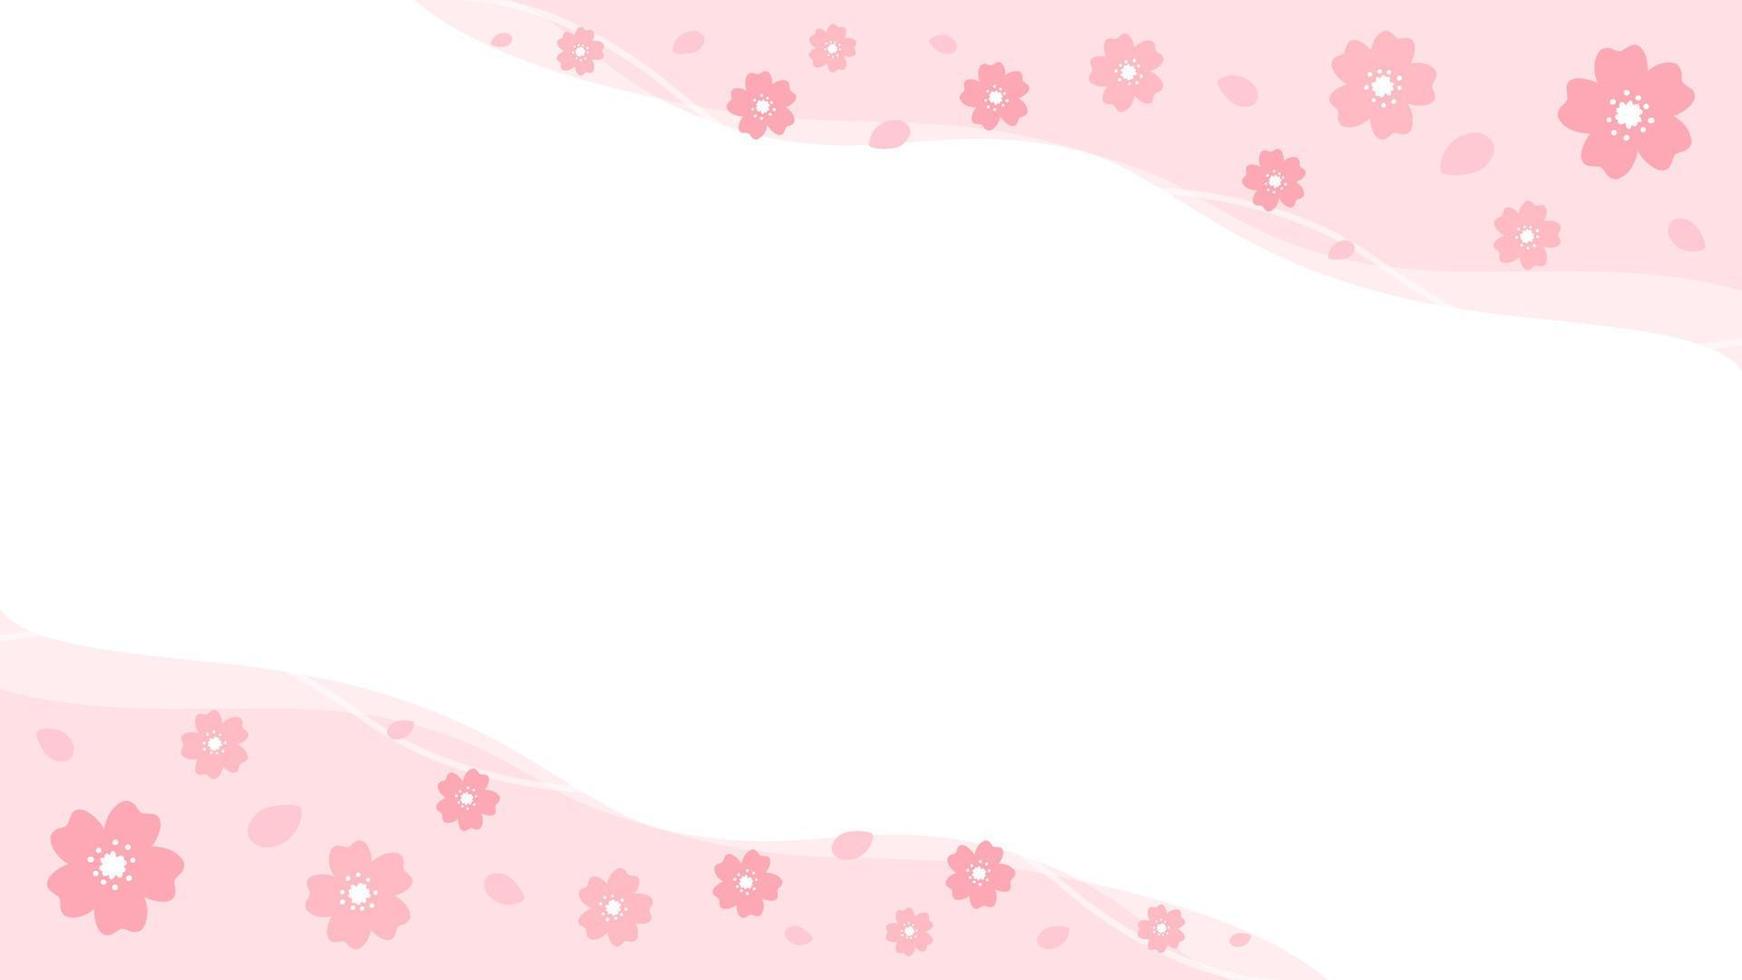 Japanese cherry blossom abstract border template on white background vector